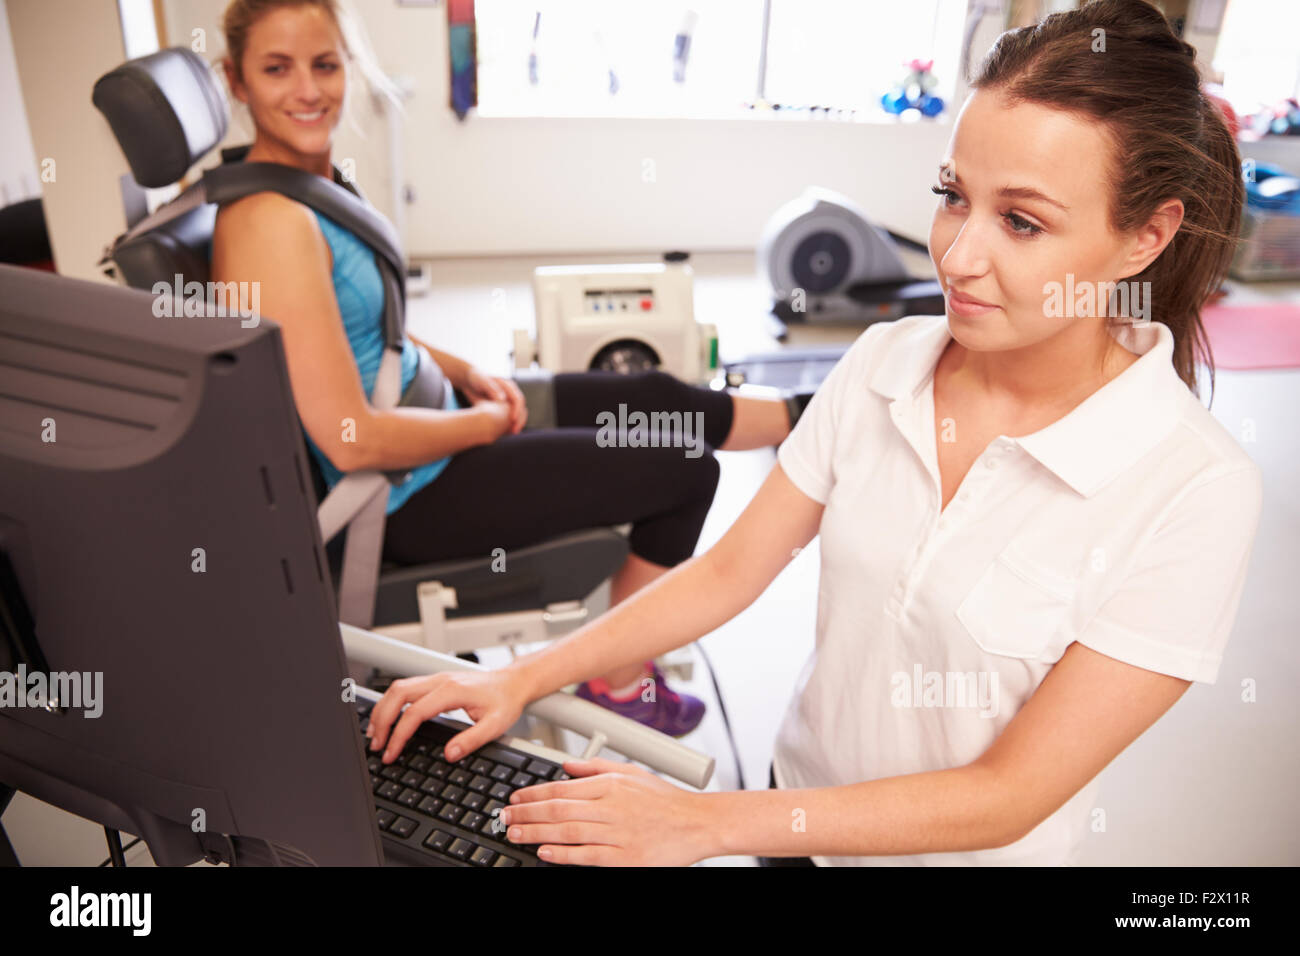 Female Patient Working With Physiotherapist In Hospital Stock Photo